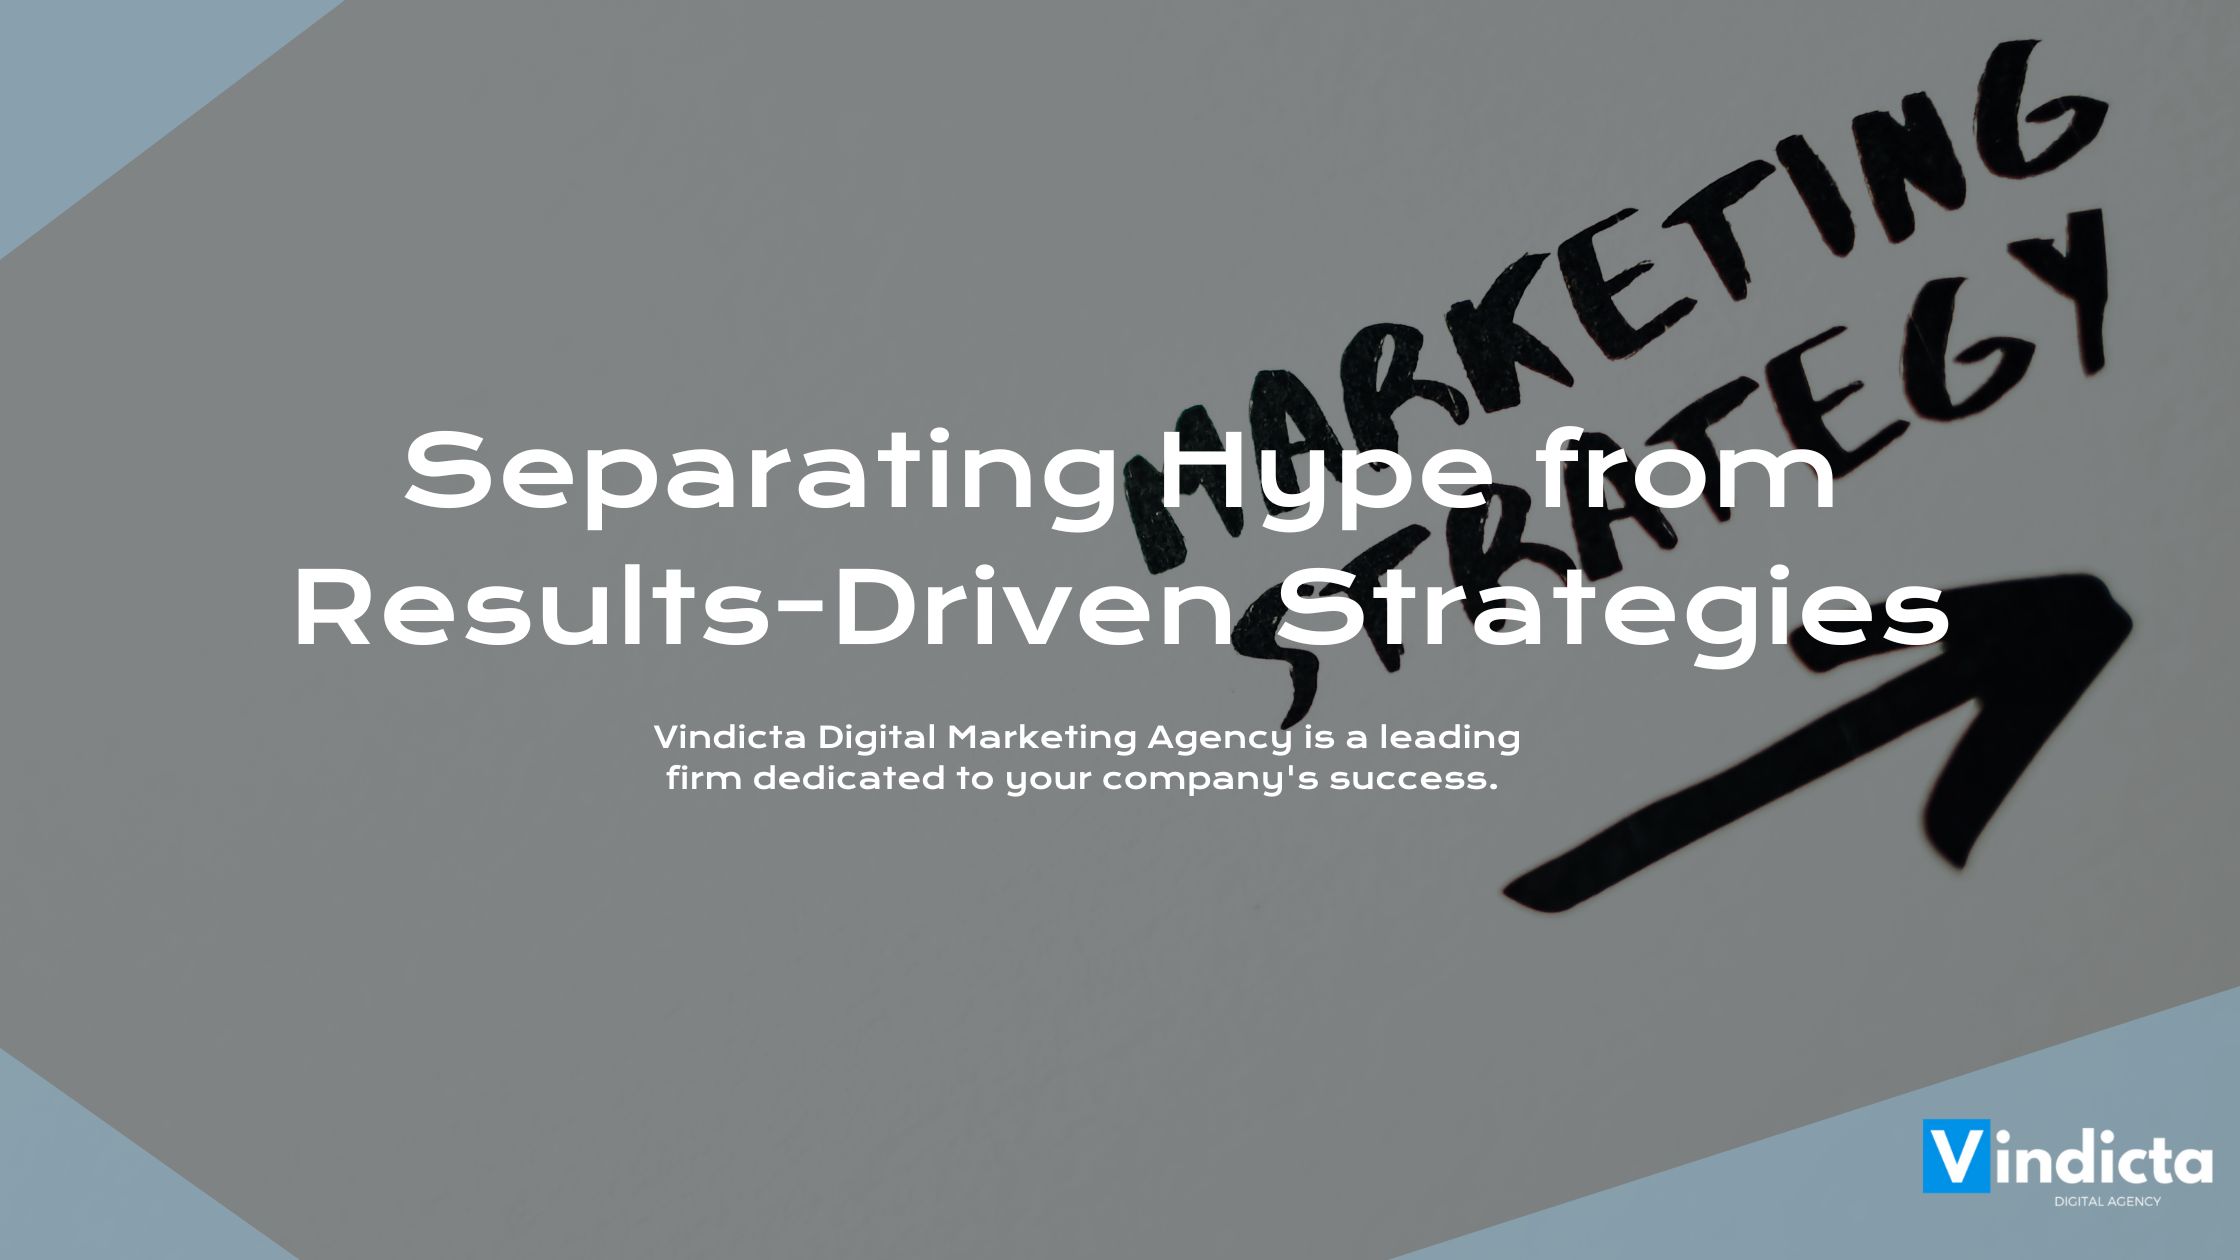 Digital Marketing Agency: Separating Hype from Results-Driven Strategies